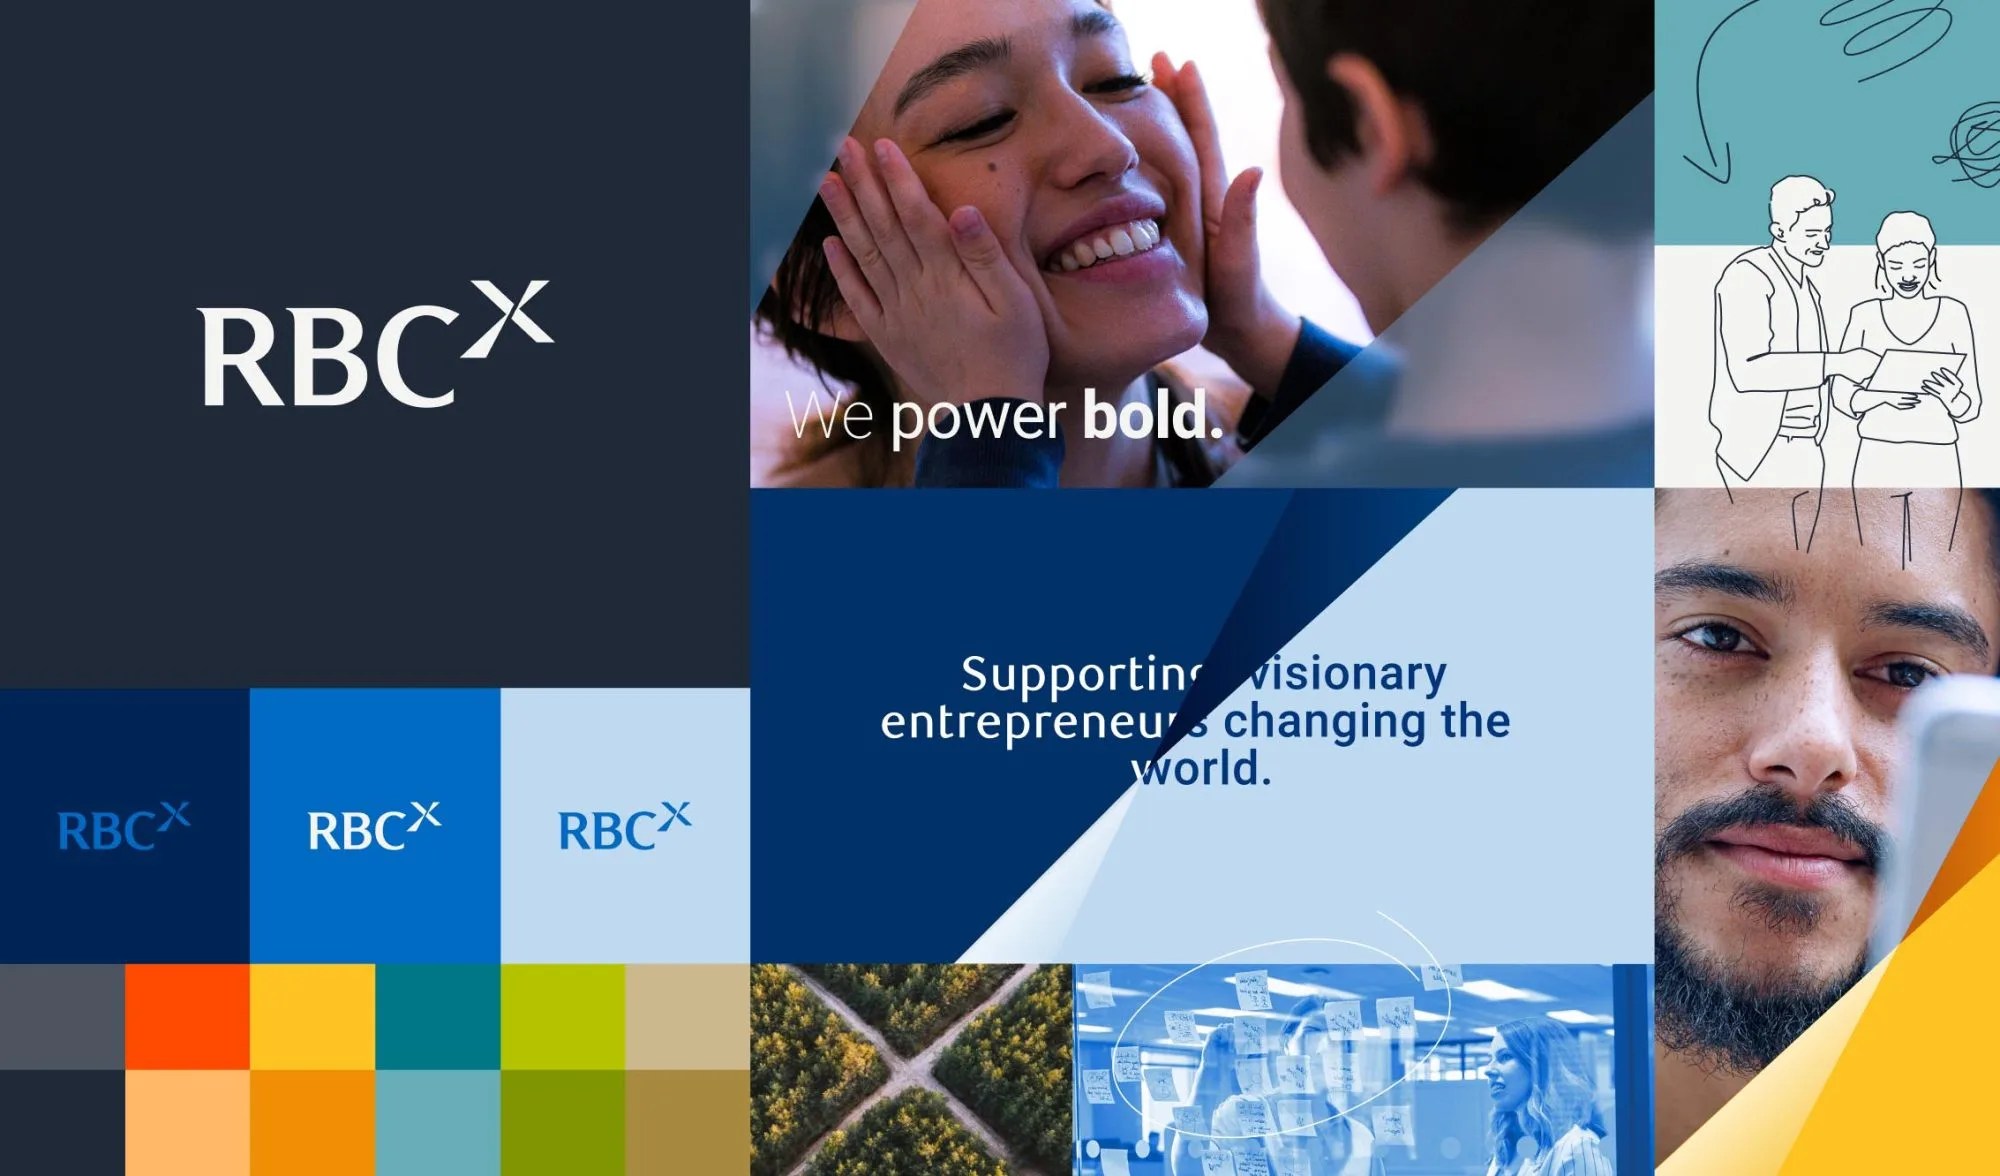 RBCx We power bold